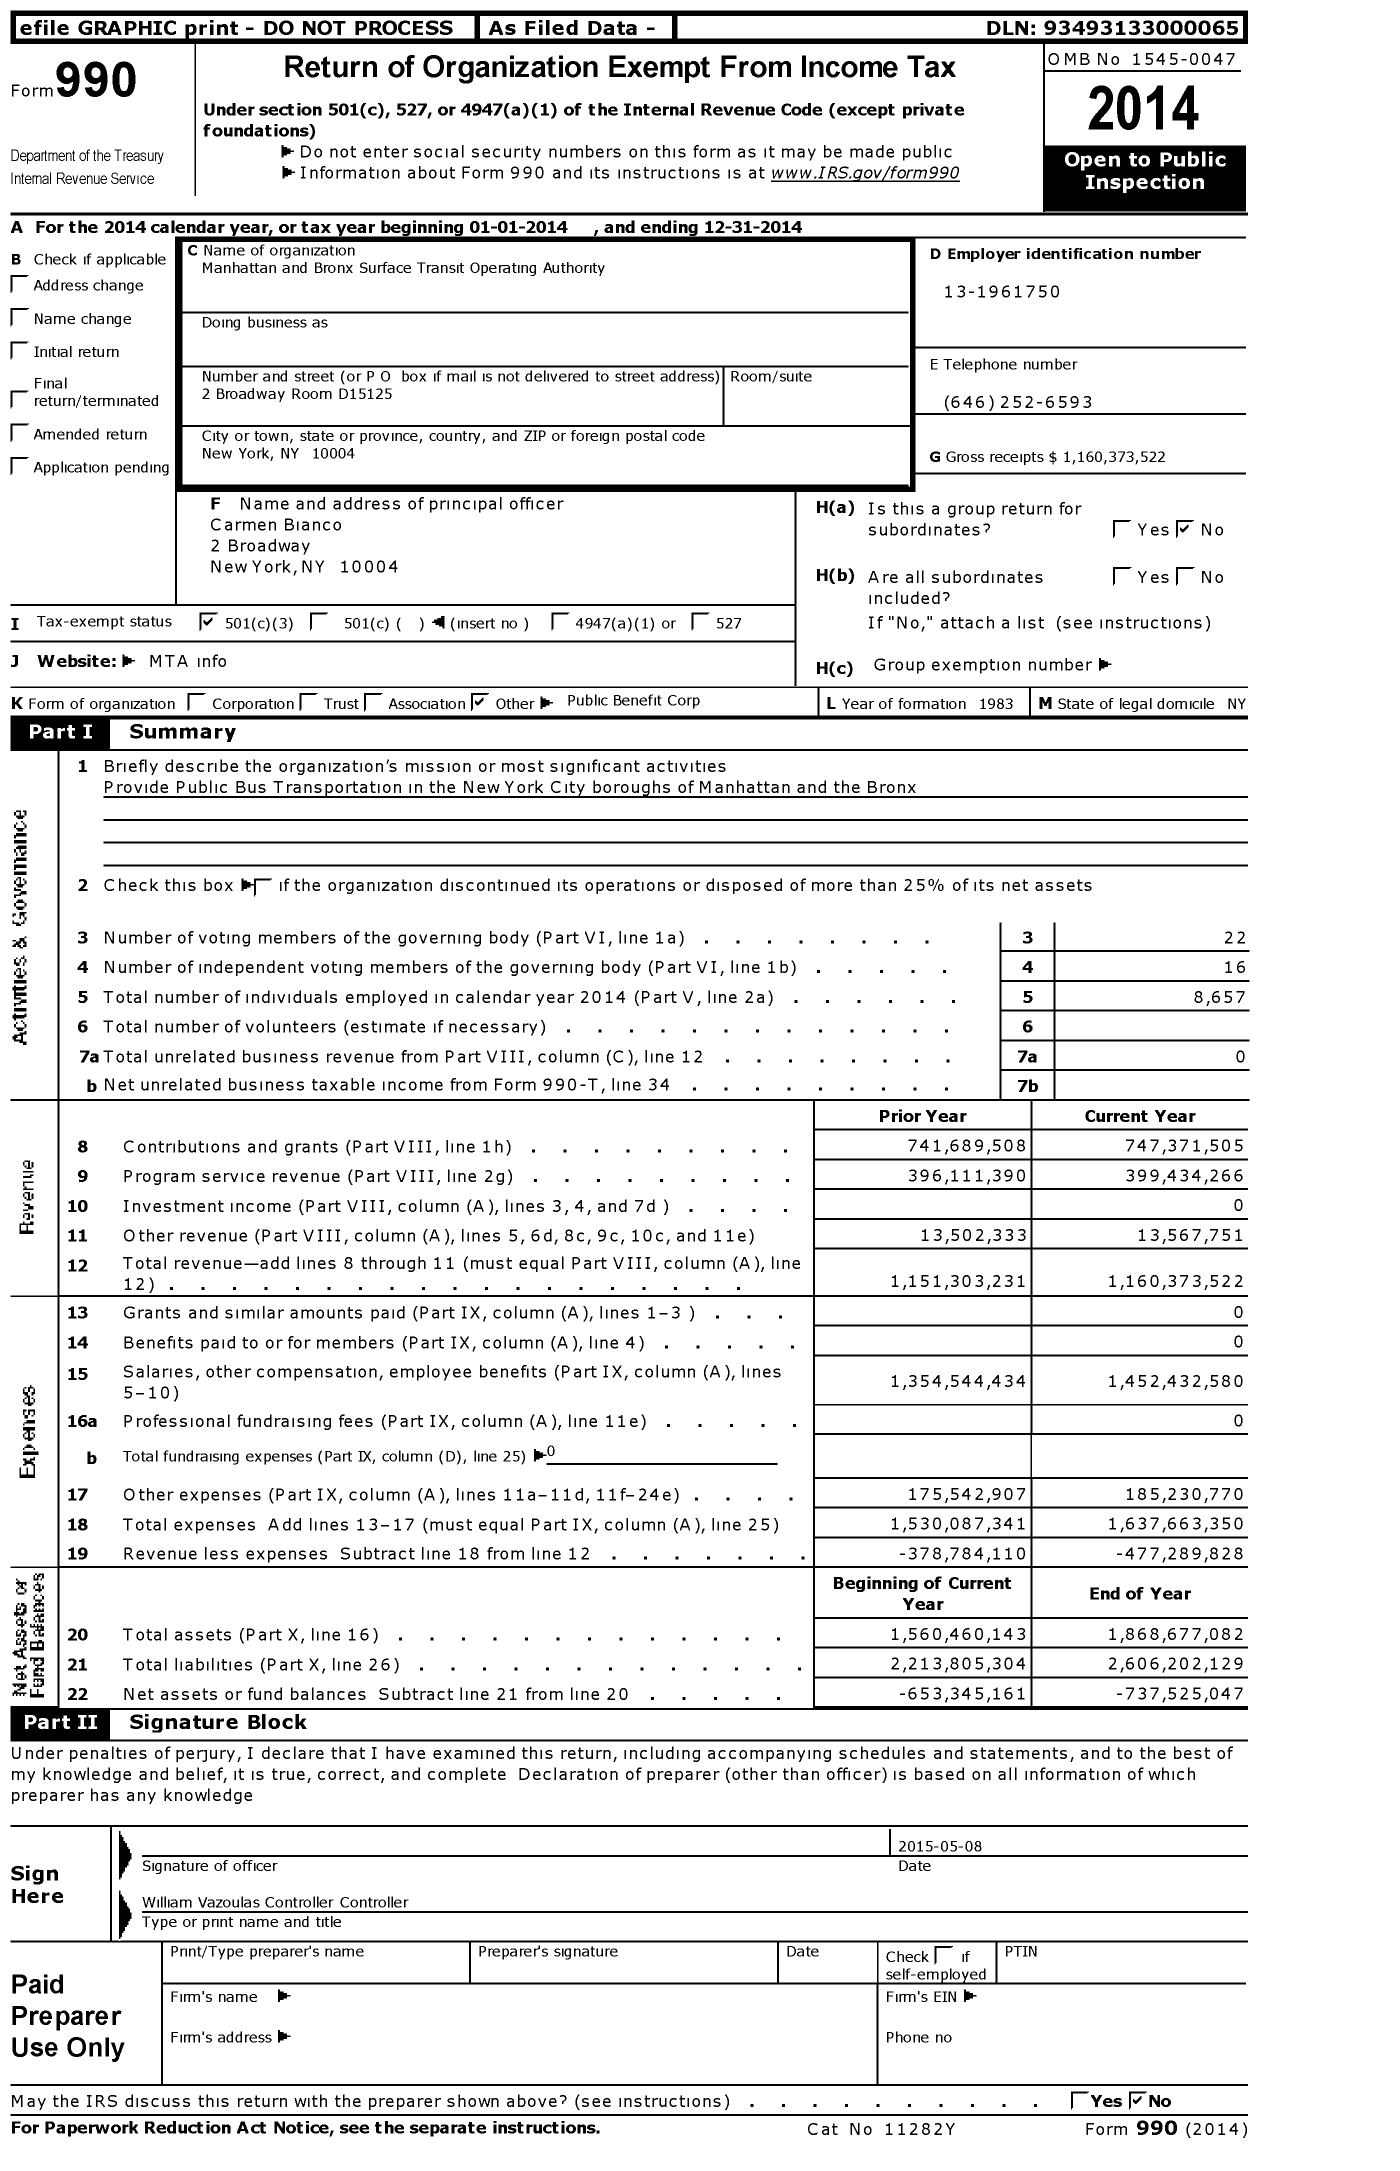 Image of first page of 2014 Form 990 for Manhattan and Bronx Surface Transit Operating Authority (MaBSTOA)